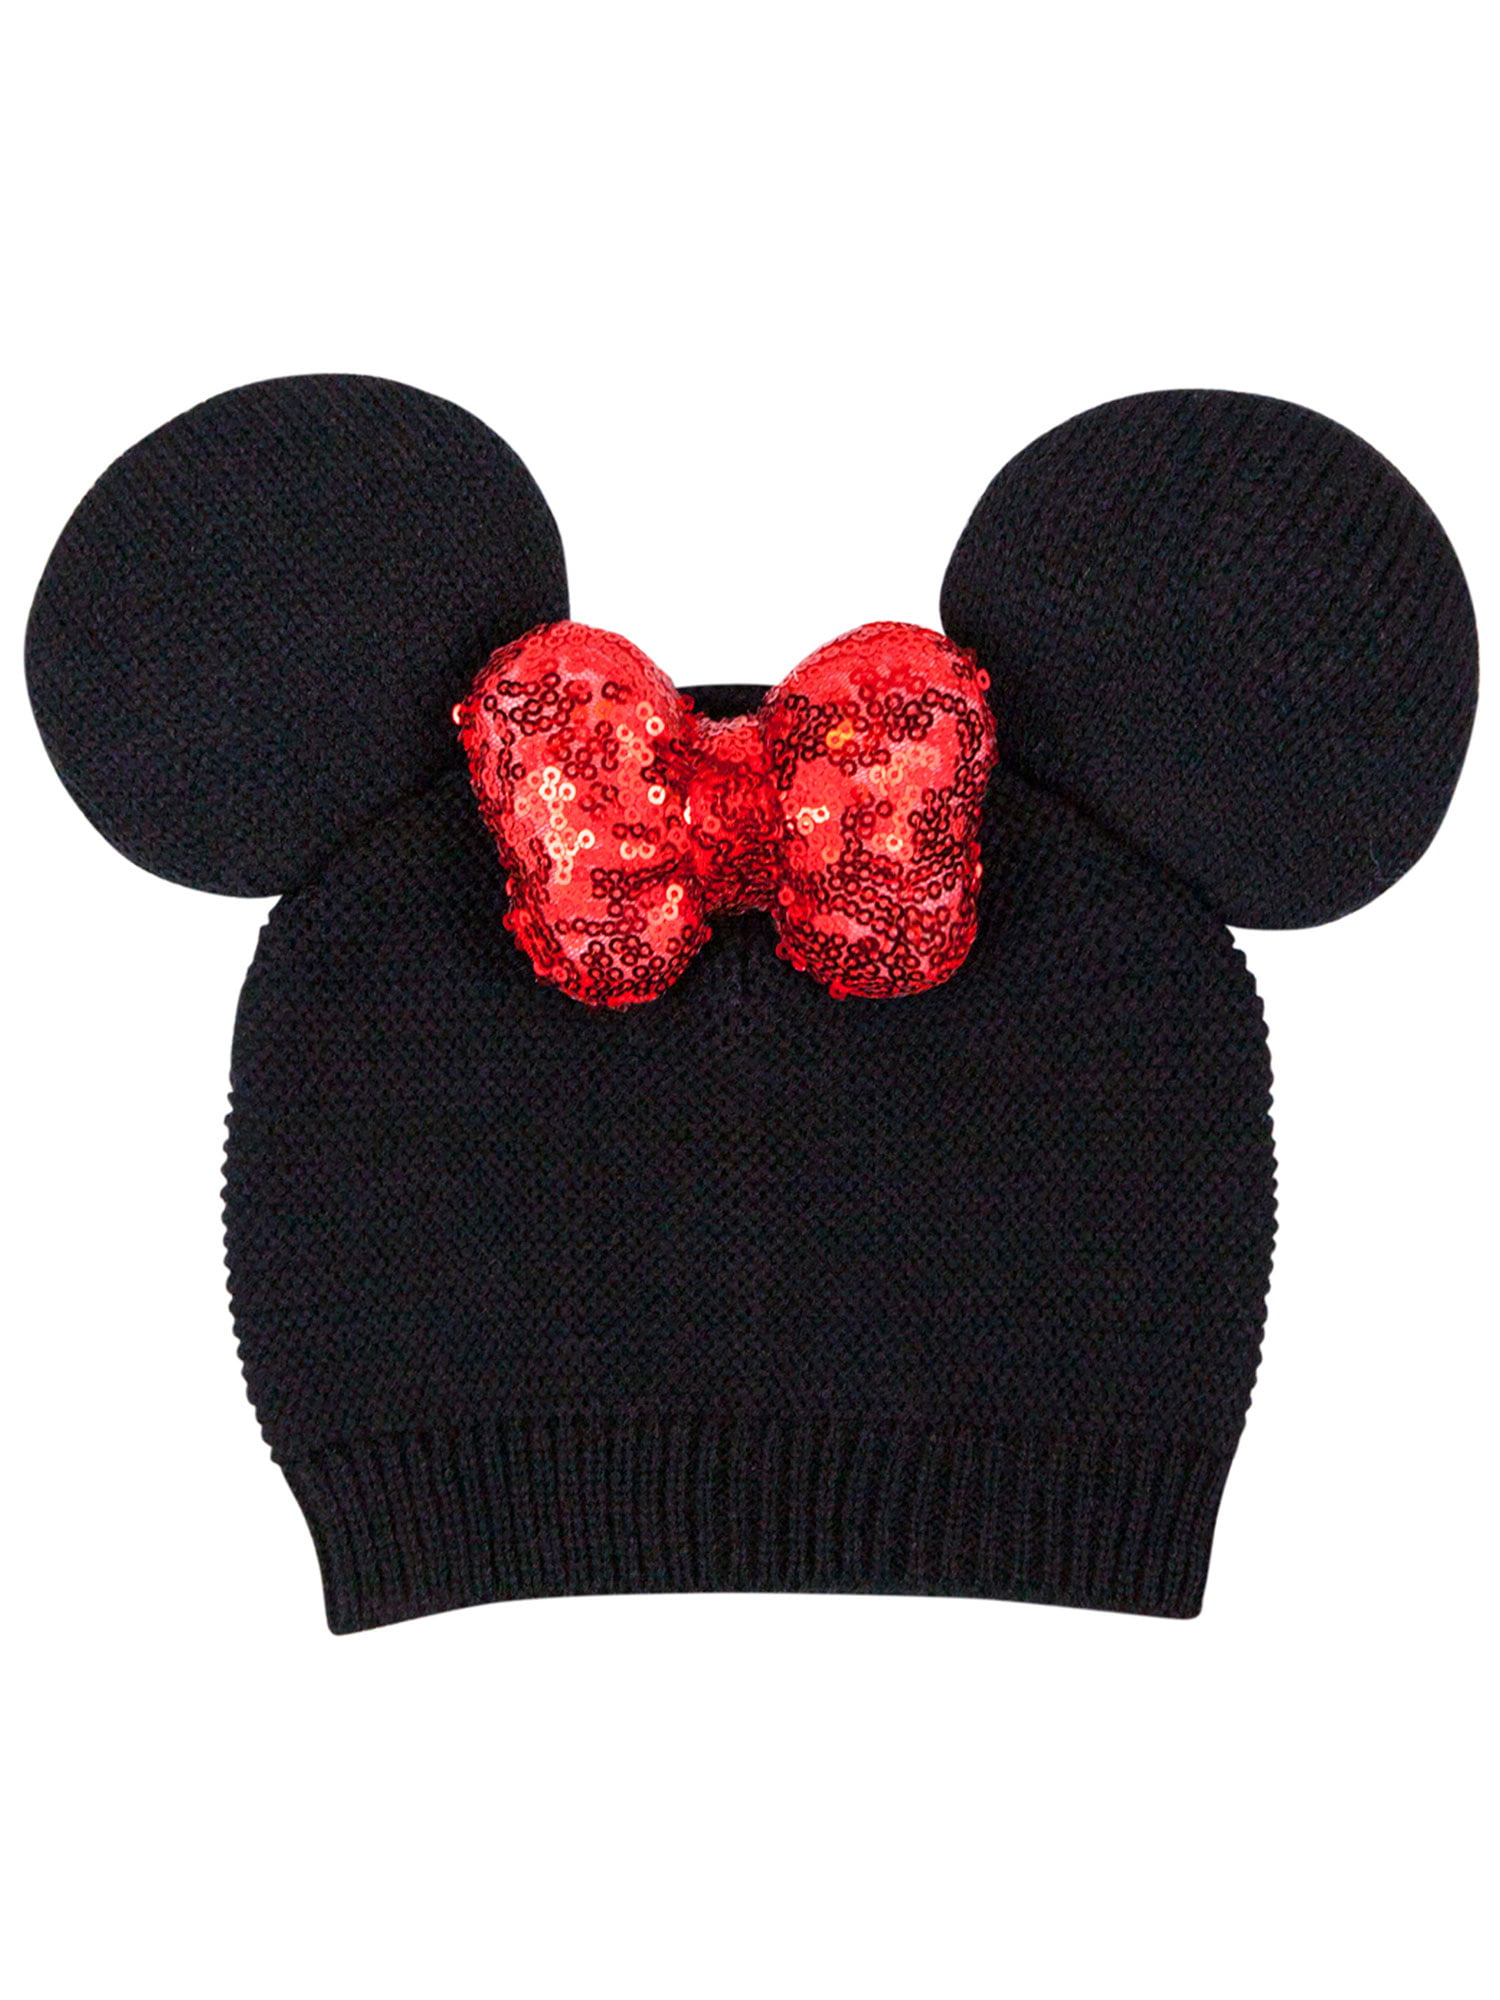 minnie mouse baby hat